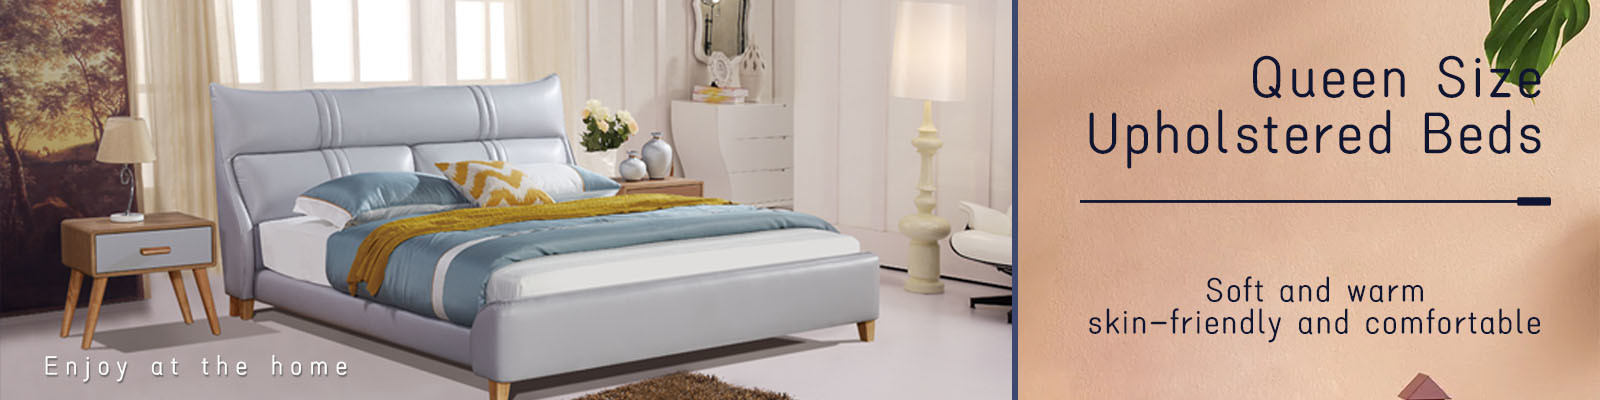 Rey Size Upholstered Beds